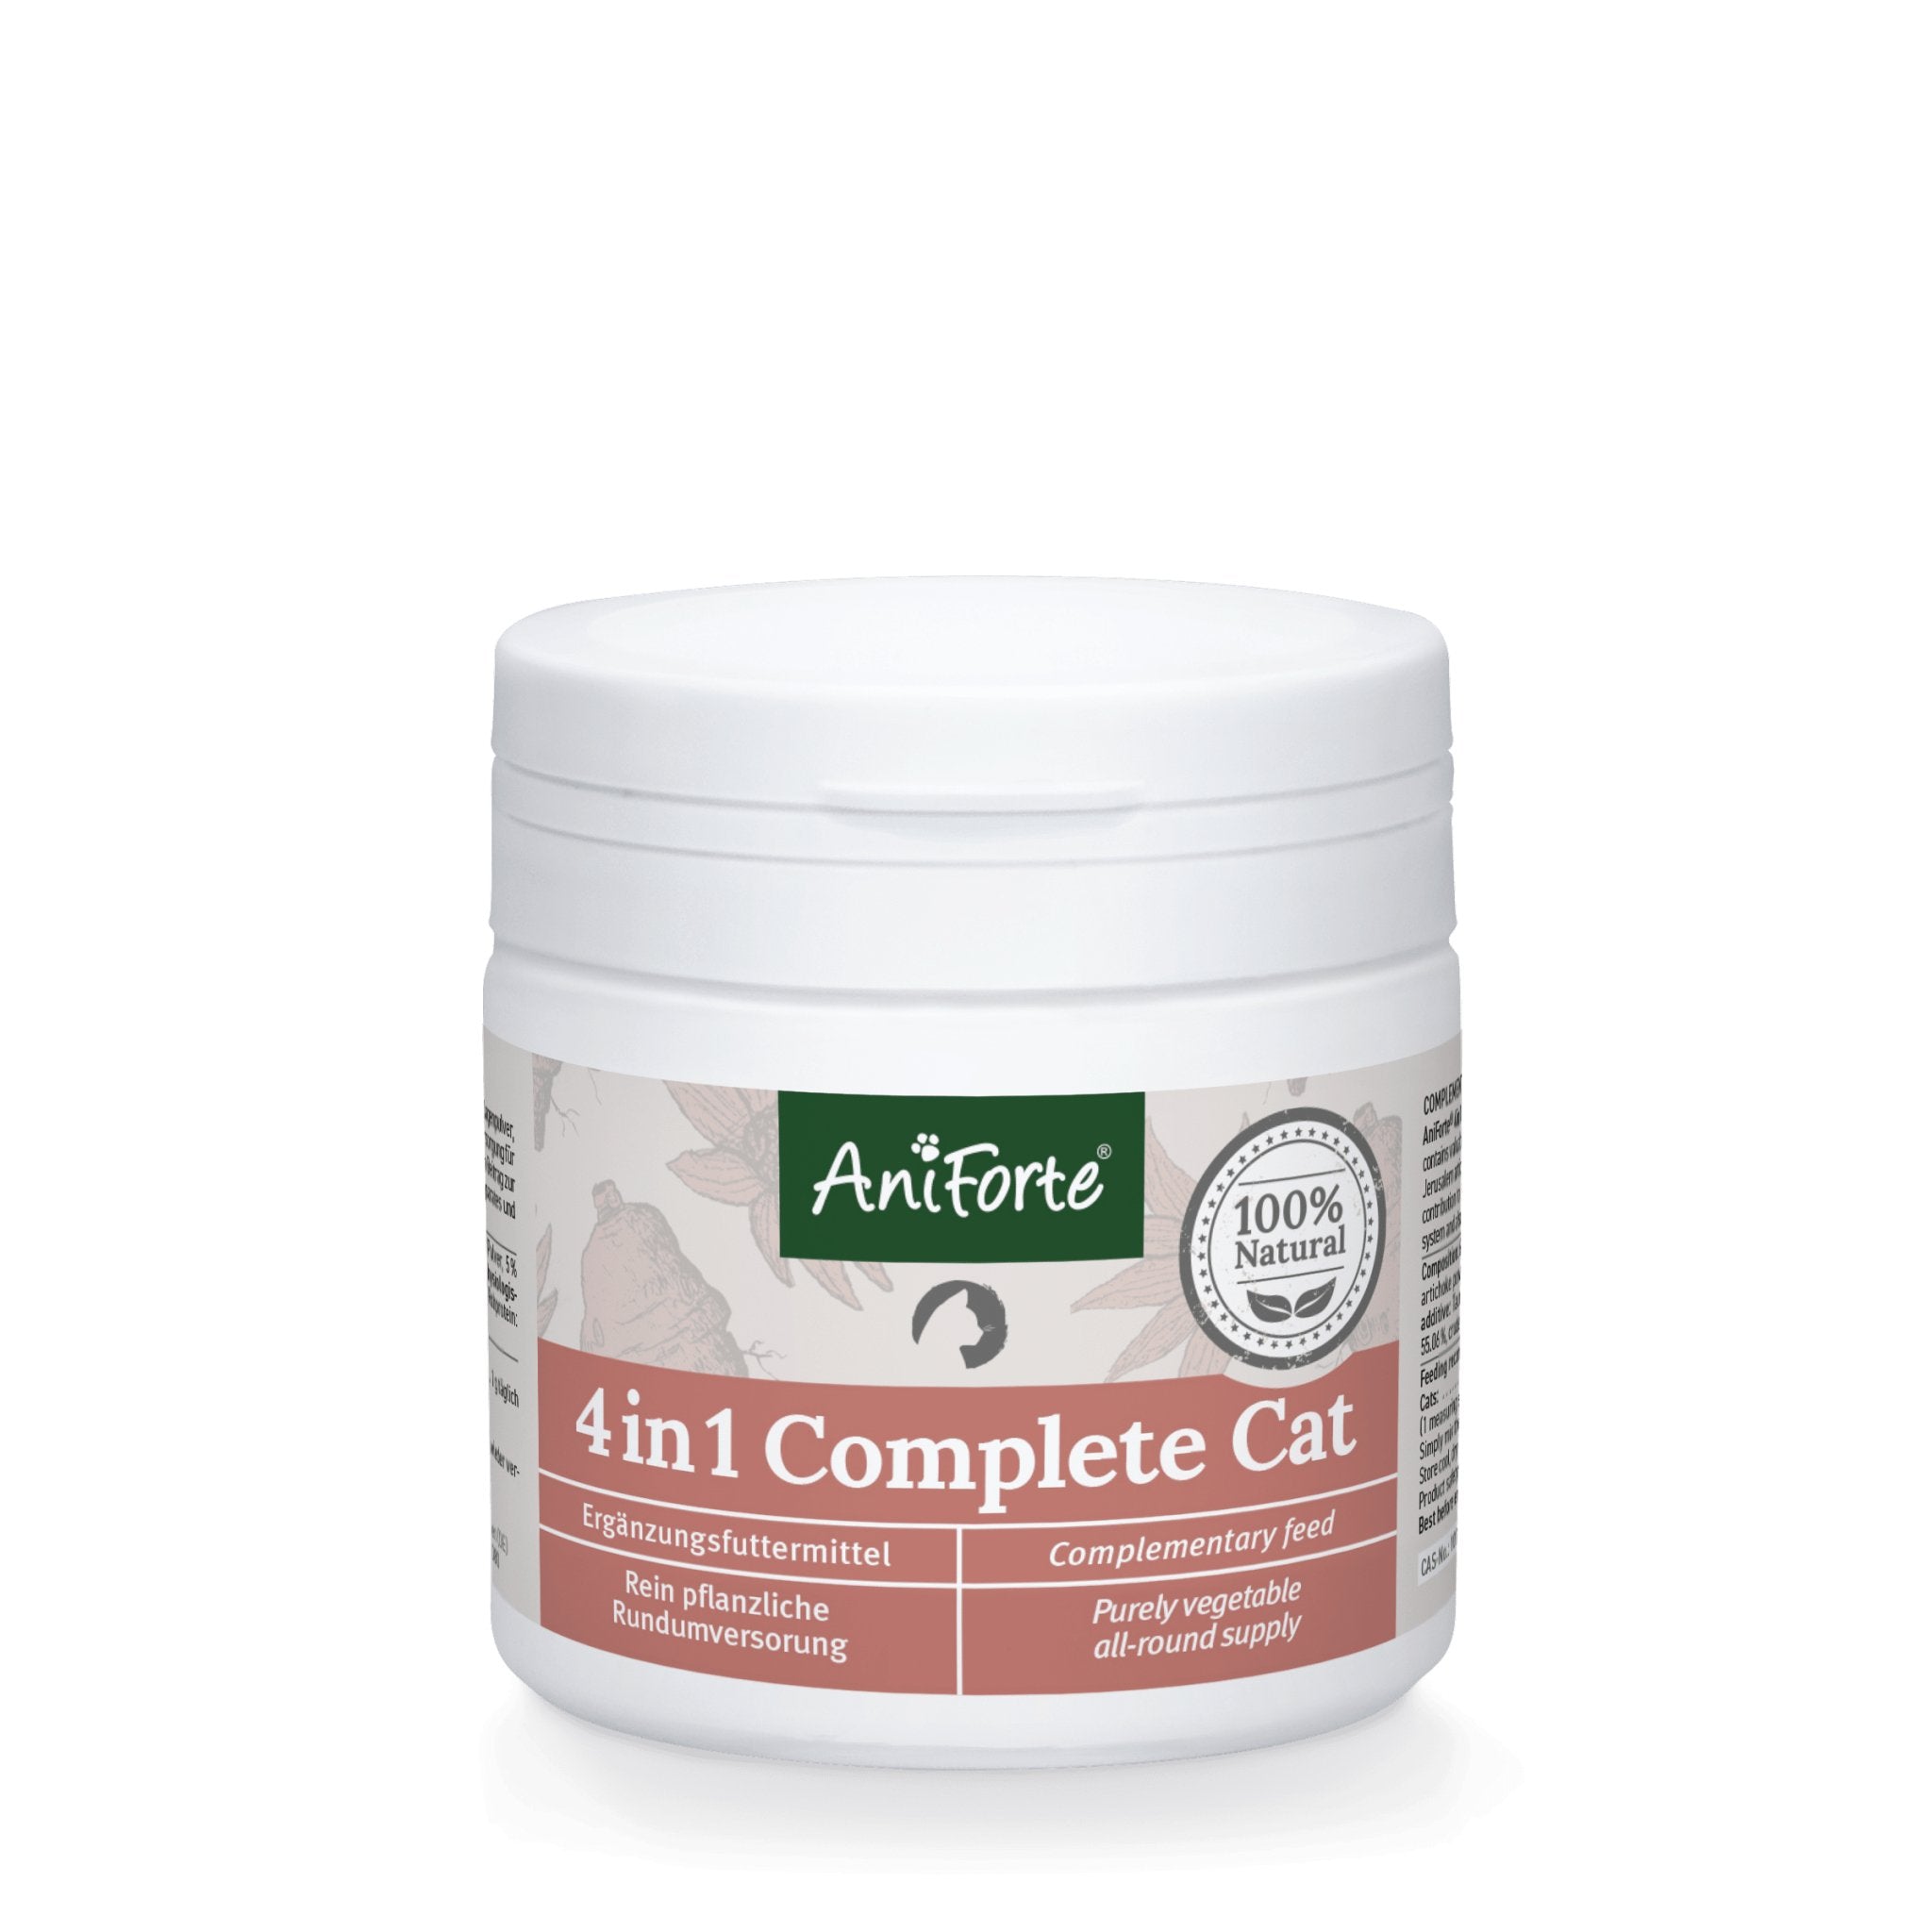 4in1 Complete for Cats 60g - Advanced Health Supplement - AniForte UK